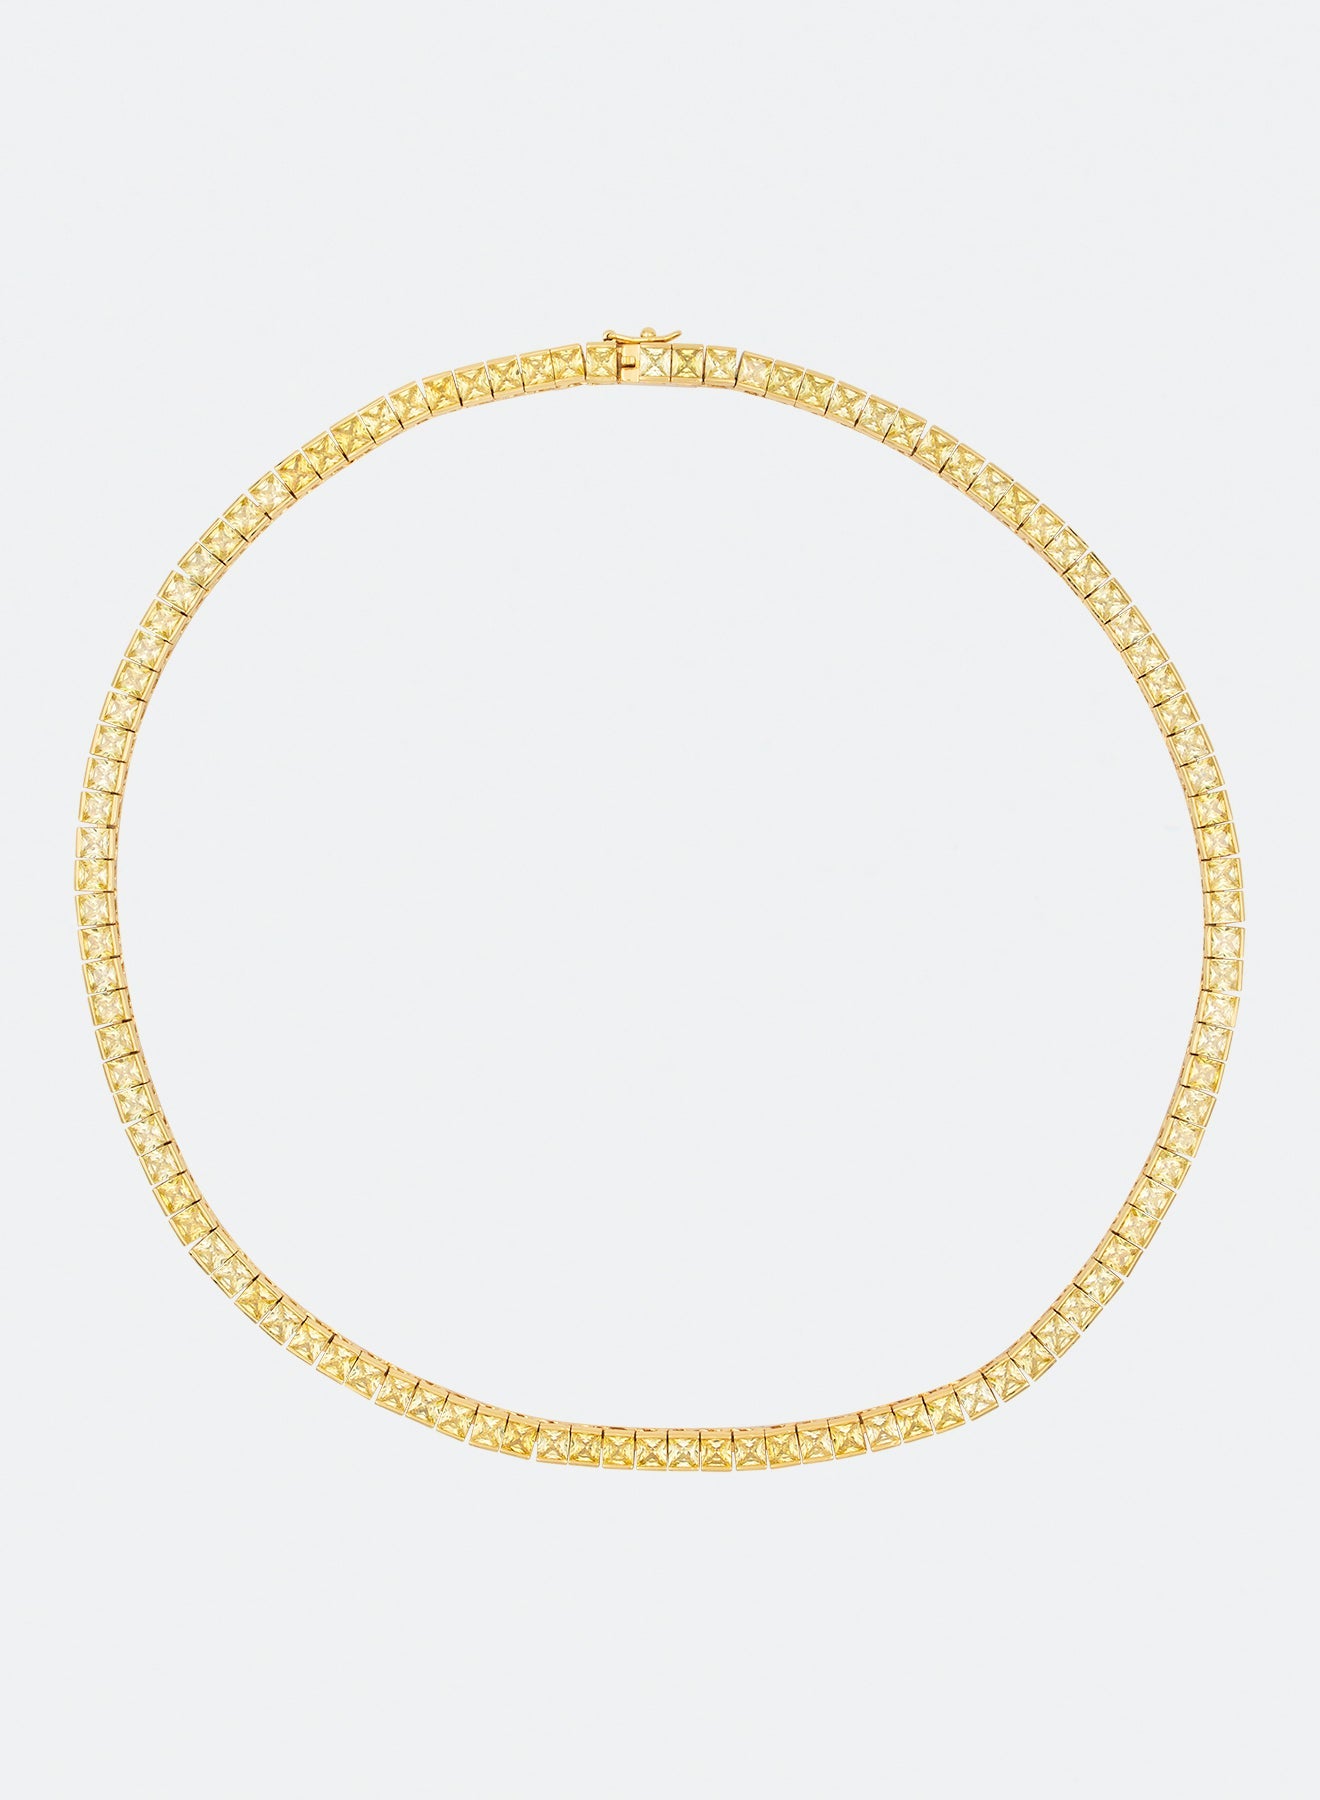 18k gold coated tennis chain necklace with hand-set princess-cut stones in yellow